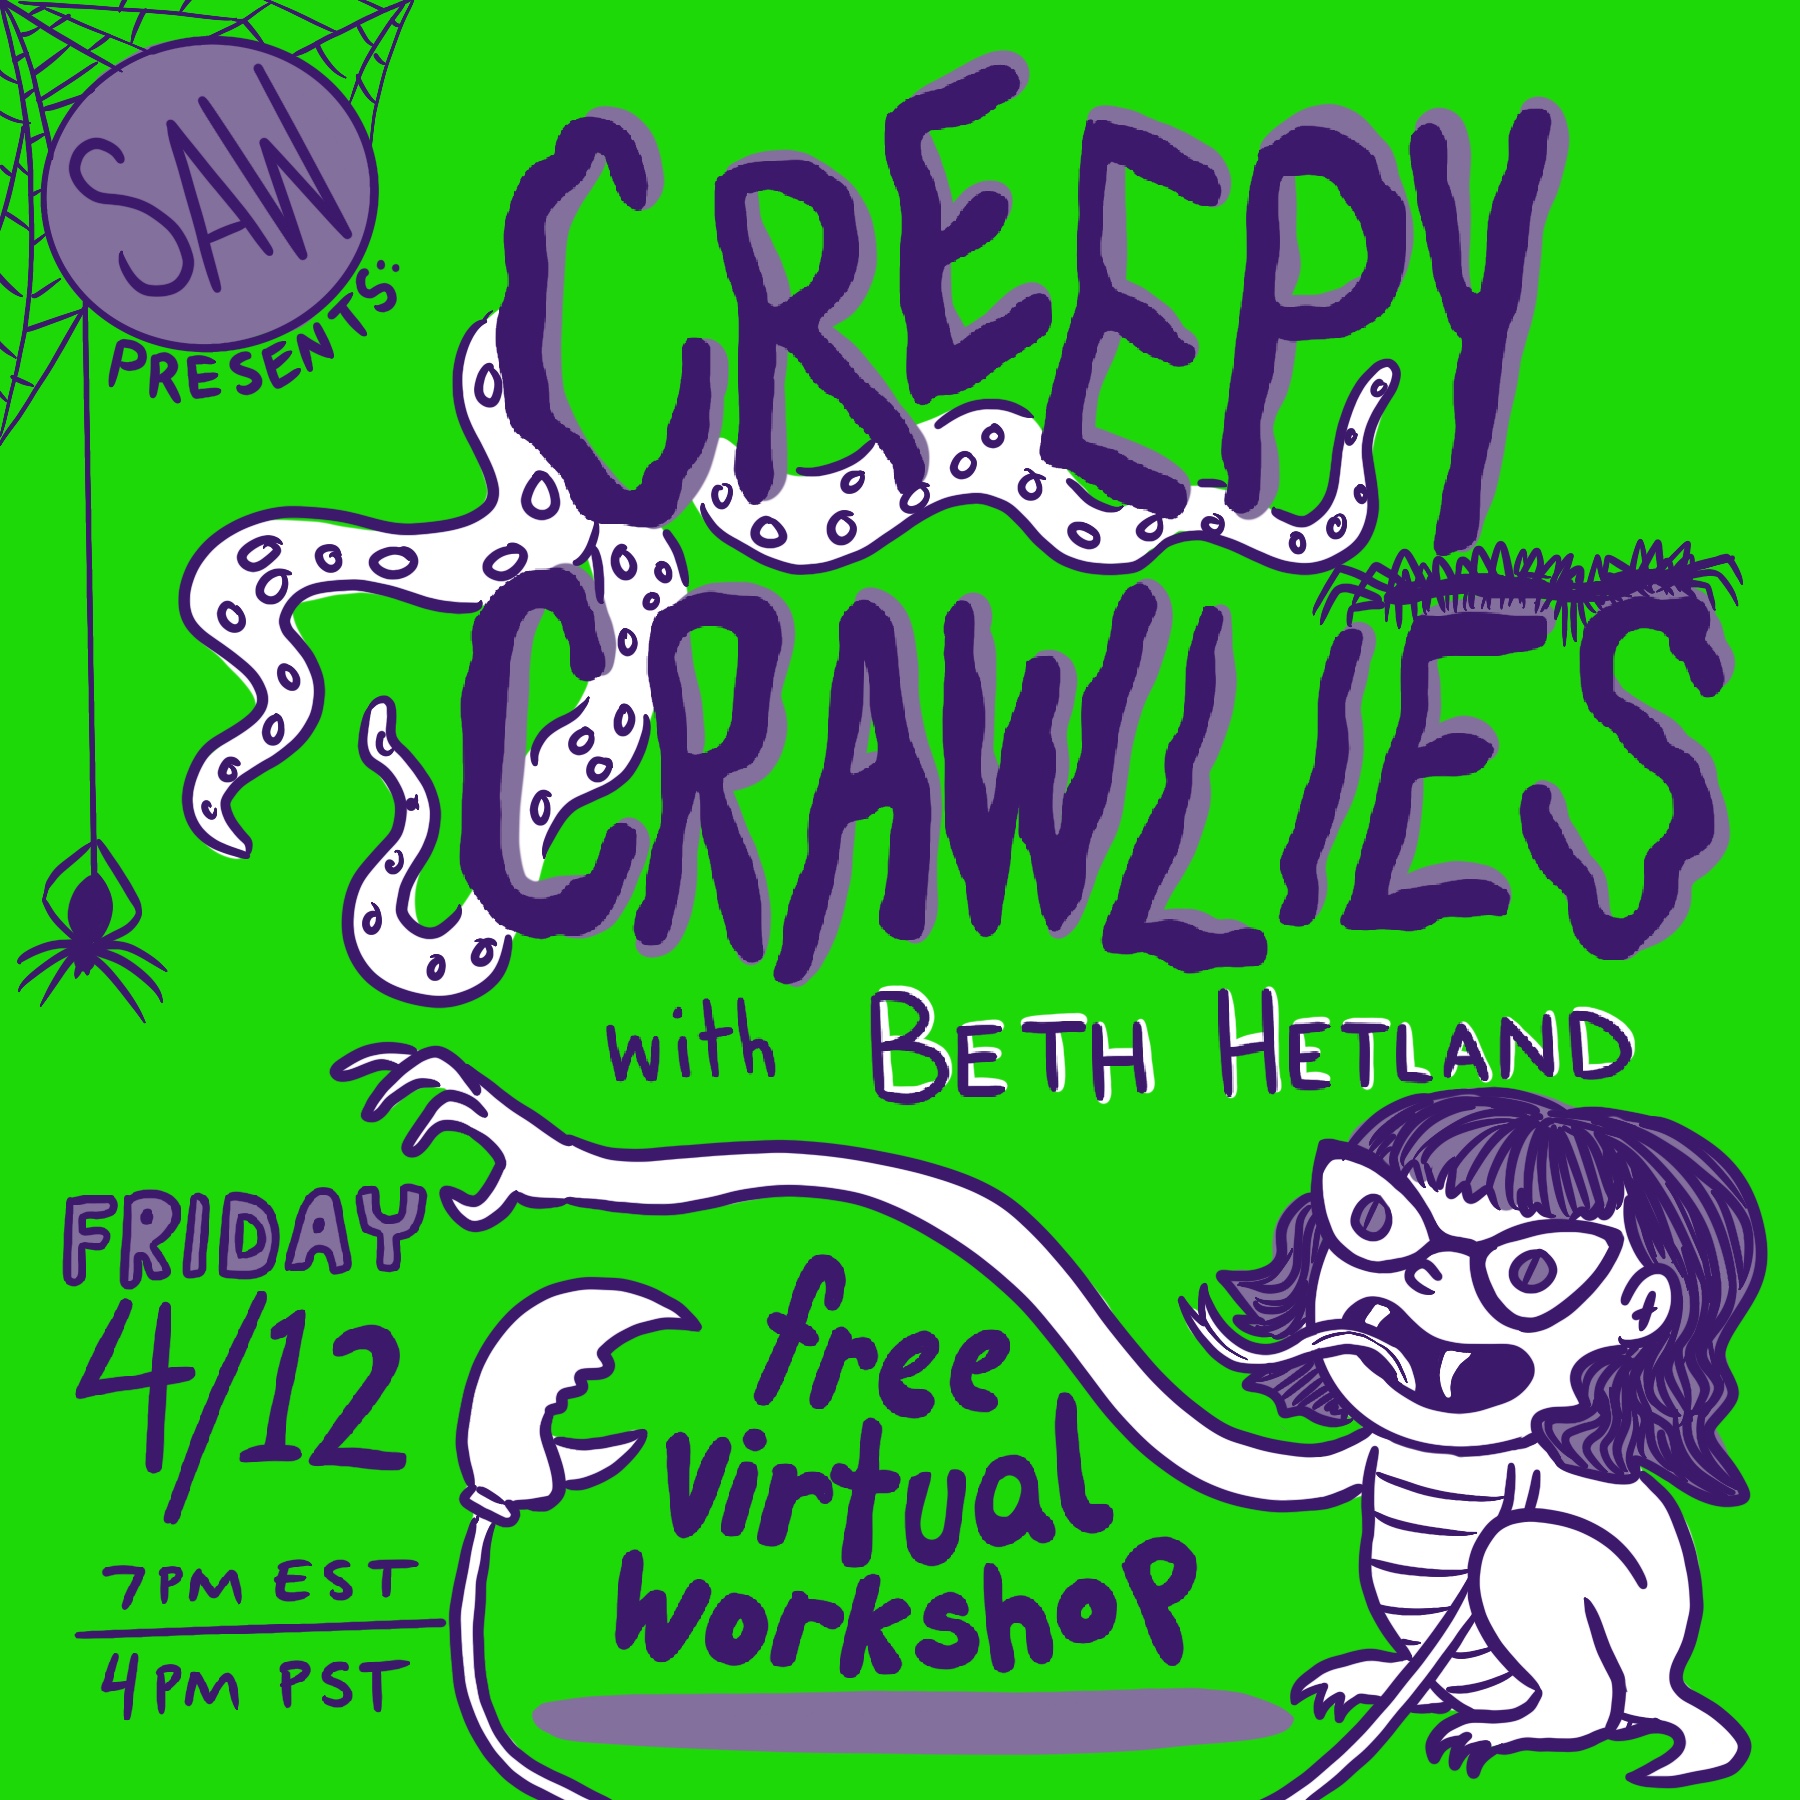 Promo graphic with a forest green background and purple squiggly text reading: â€œSAW Presents: CREEPY CRAWLIES with Beth Hetland / Friday 4/12 7pm EST / 4pm PST / free virtual workshopâ€
In the top left corner, the SAW presents logo is caught in a spiderweb, which the spider hangs from by its thread. Tentacles decorate the Creepy Crawlies text. A small gremlin-monster version of Beth squats in the bottom right corner, long squiggly arms outstretched, one ending in a normal hand and the other in a crustaceous claw. Beth has her signature cat-eye glasses, bangs and bob, but also has slit-pupils like a cat. She is smiling widely, revealing fangs and a snakeâ€™s tongue. Her body looks reptilian and has clawed feet and a little tail. 